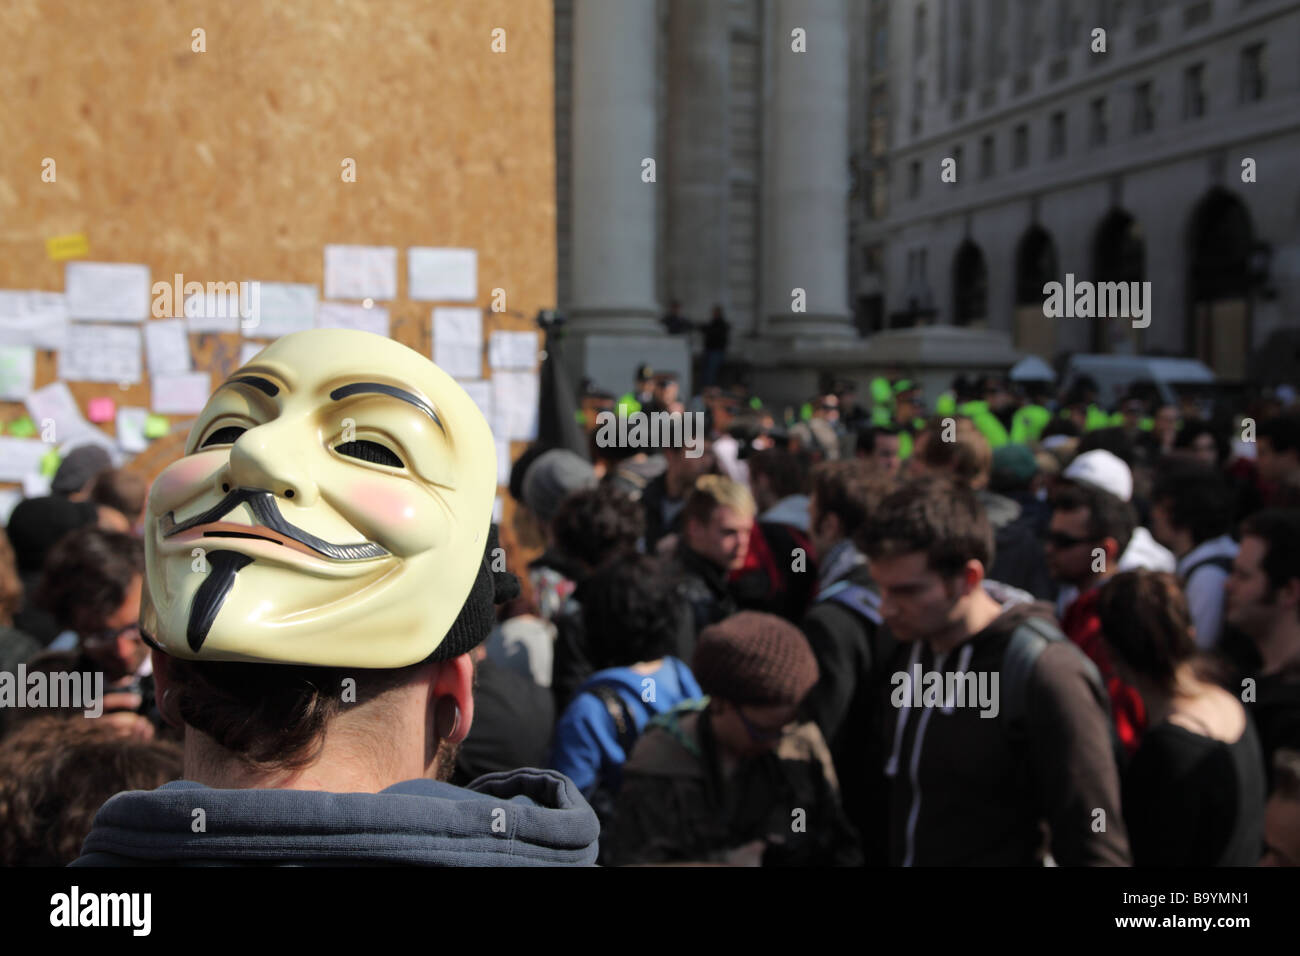 Masked protester outside the Bank of England during the 2009 G20 summit, London, UK. Stock Photo